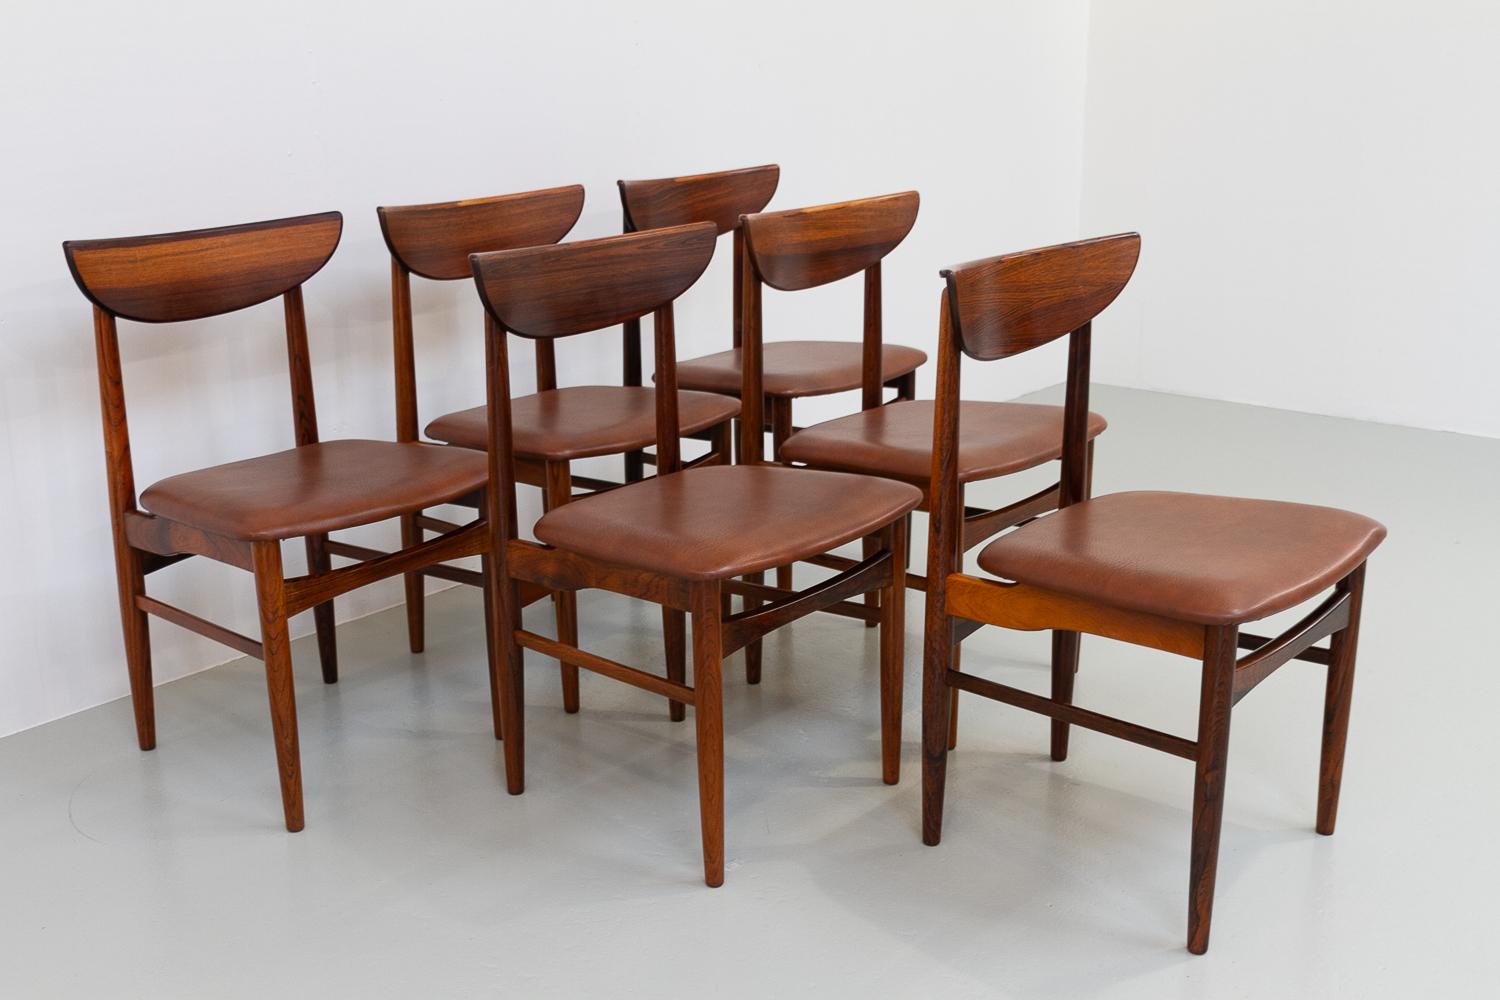 Vintage Danish Rosewood Dining Chairs by E.W. Bach for Skovby, 1960s. Set of 6. In Good Condition For Sale In Asaa, DK